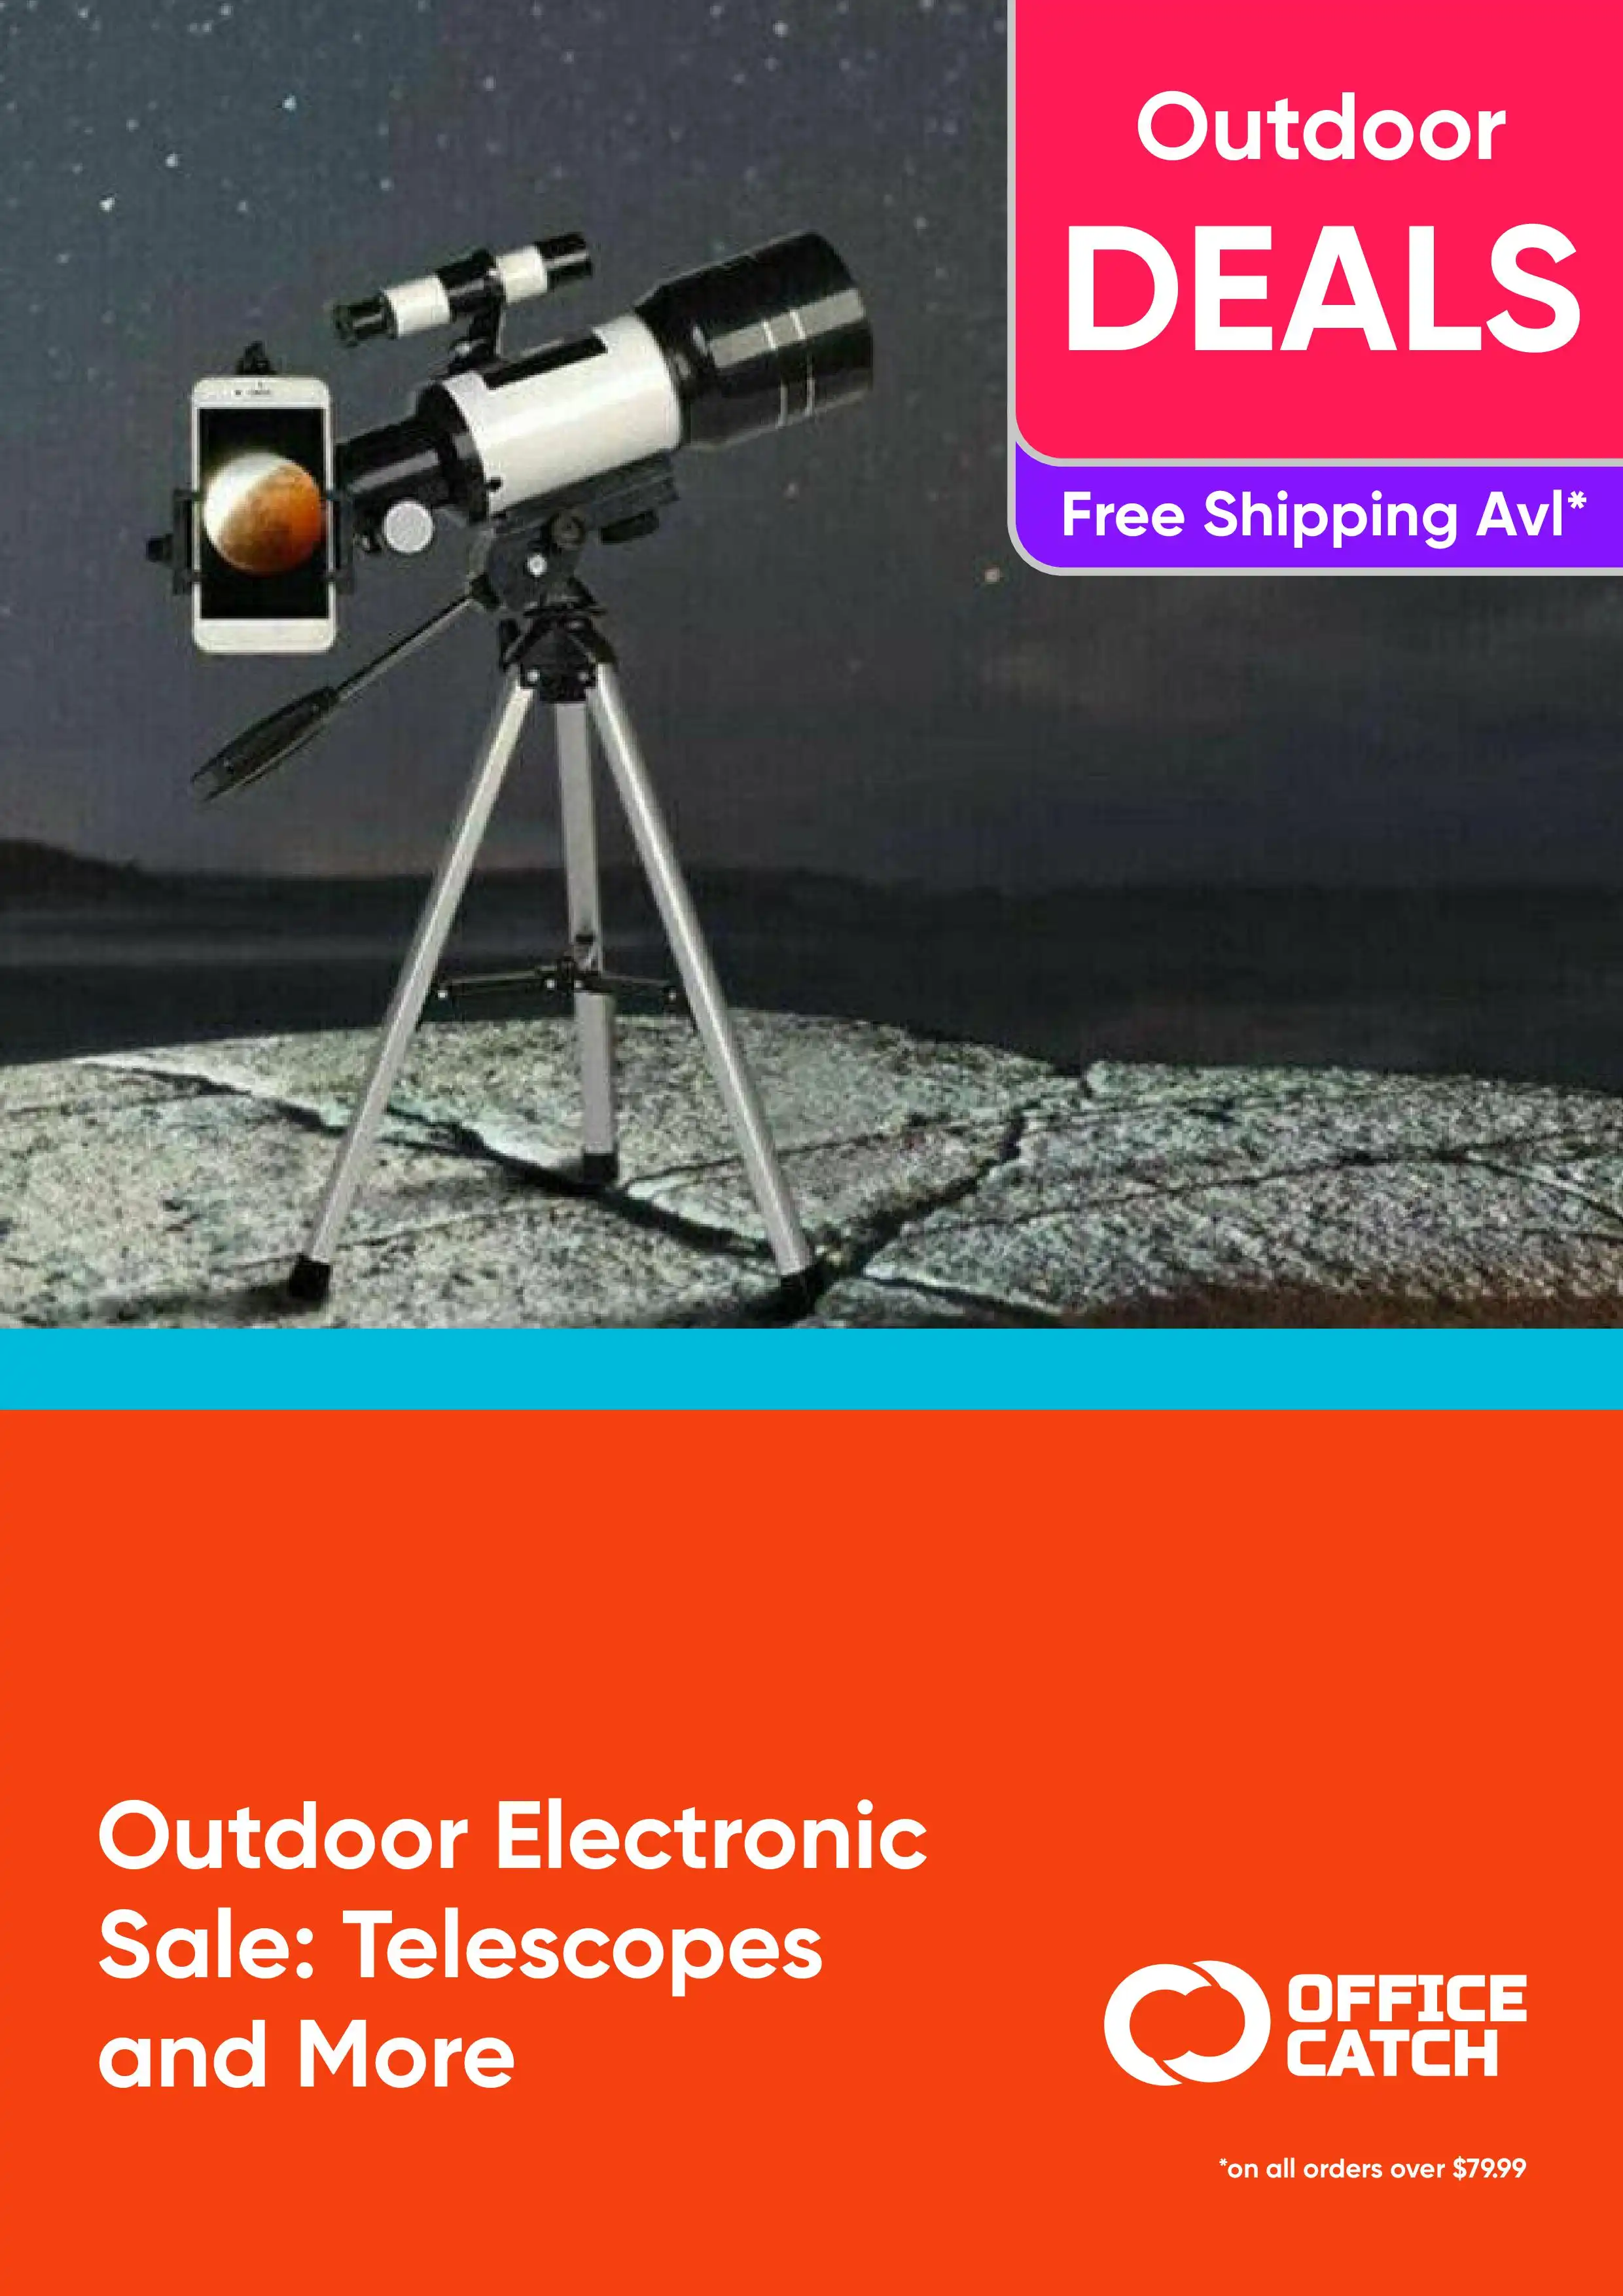 Outdoor Electronic Sale - Telescopes and More